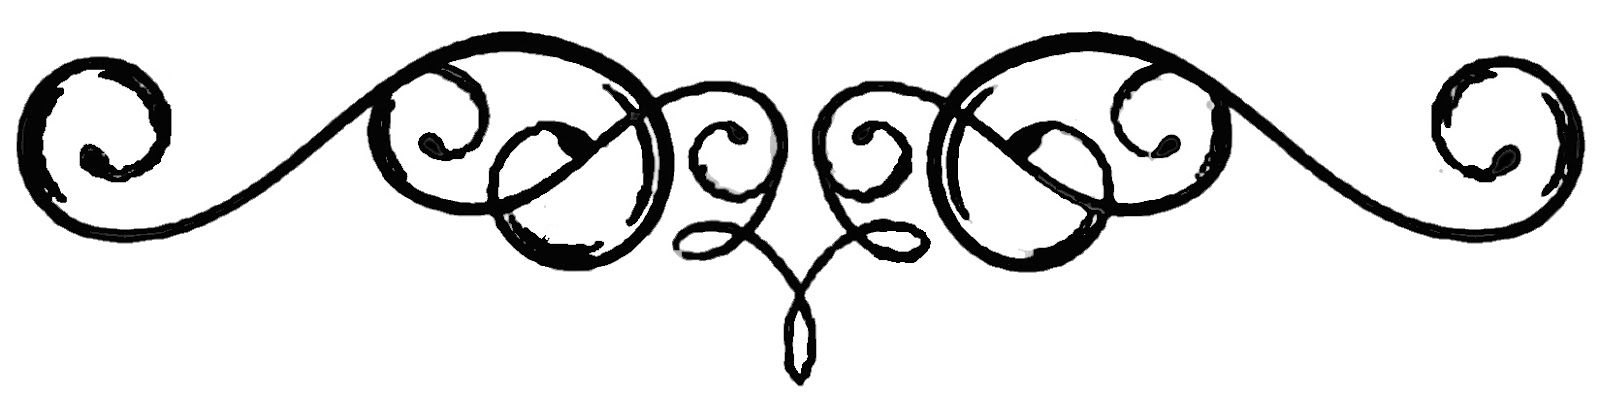 Free Country Scroll Cliparts, Download Free Country Scroll Cliparts png